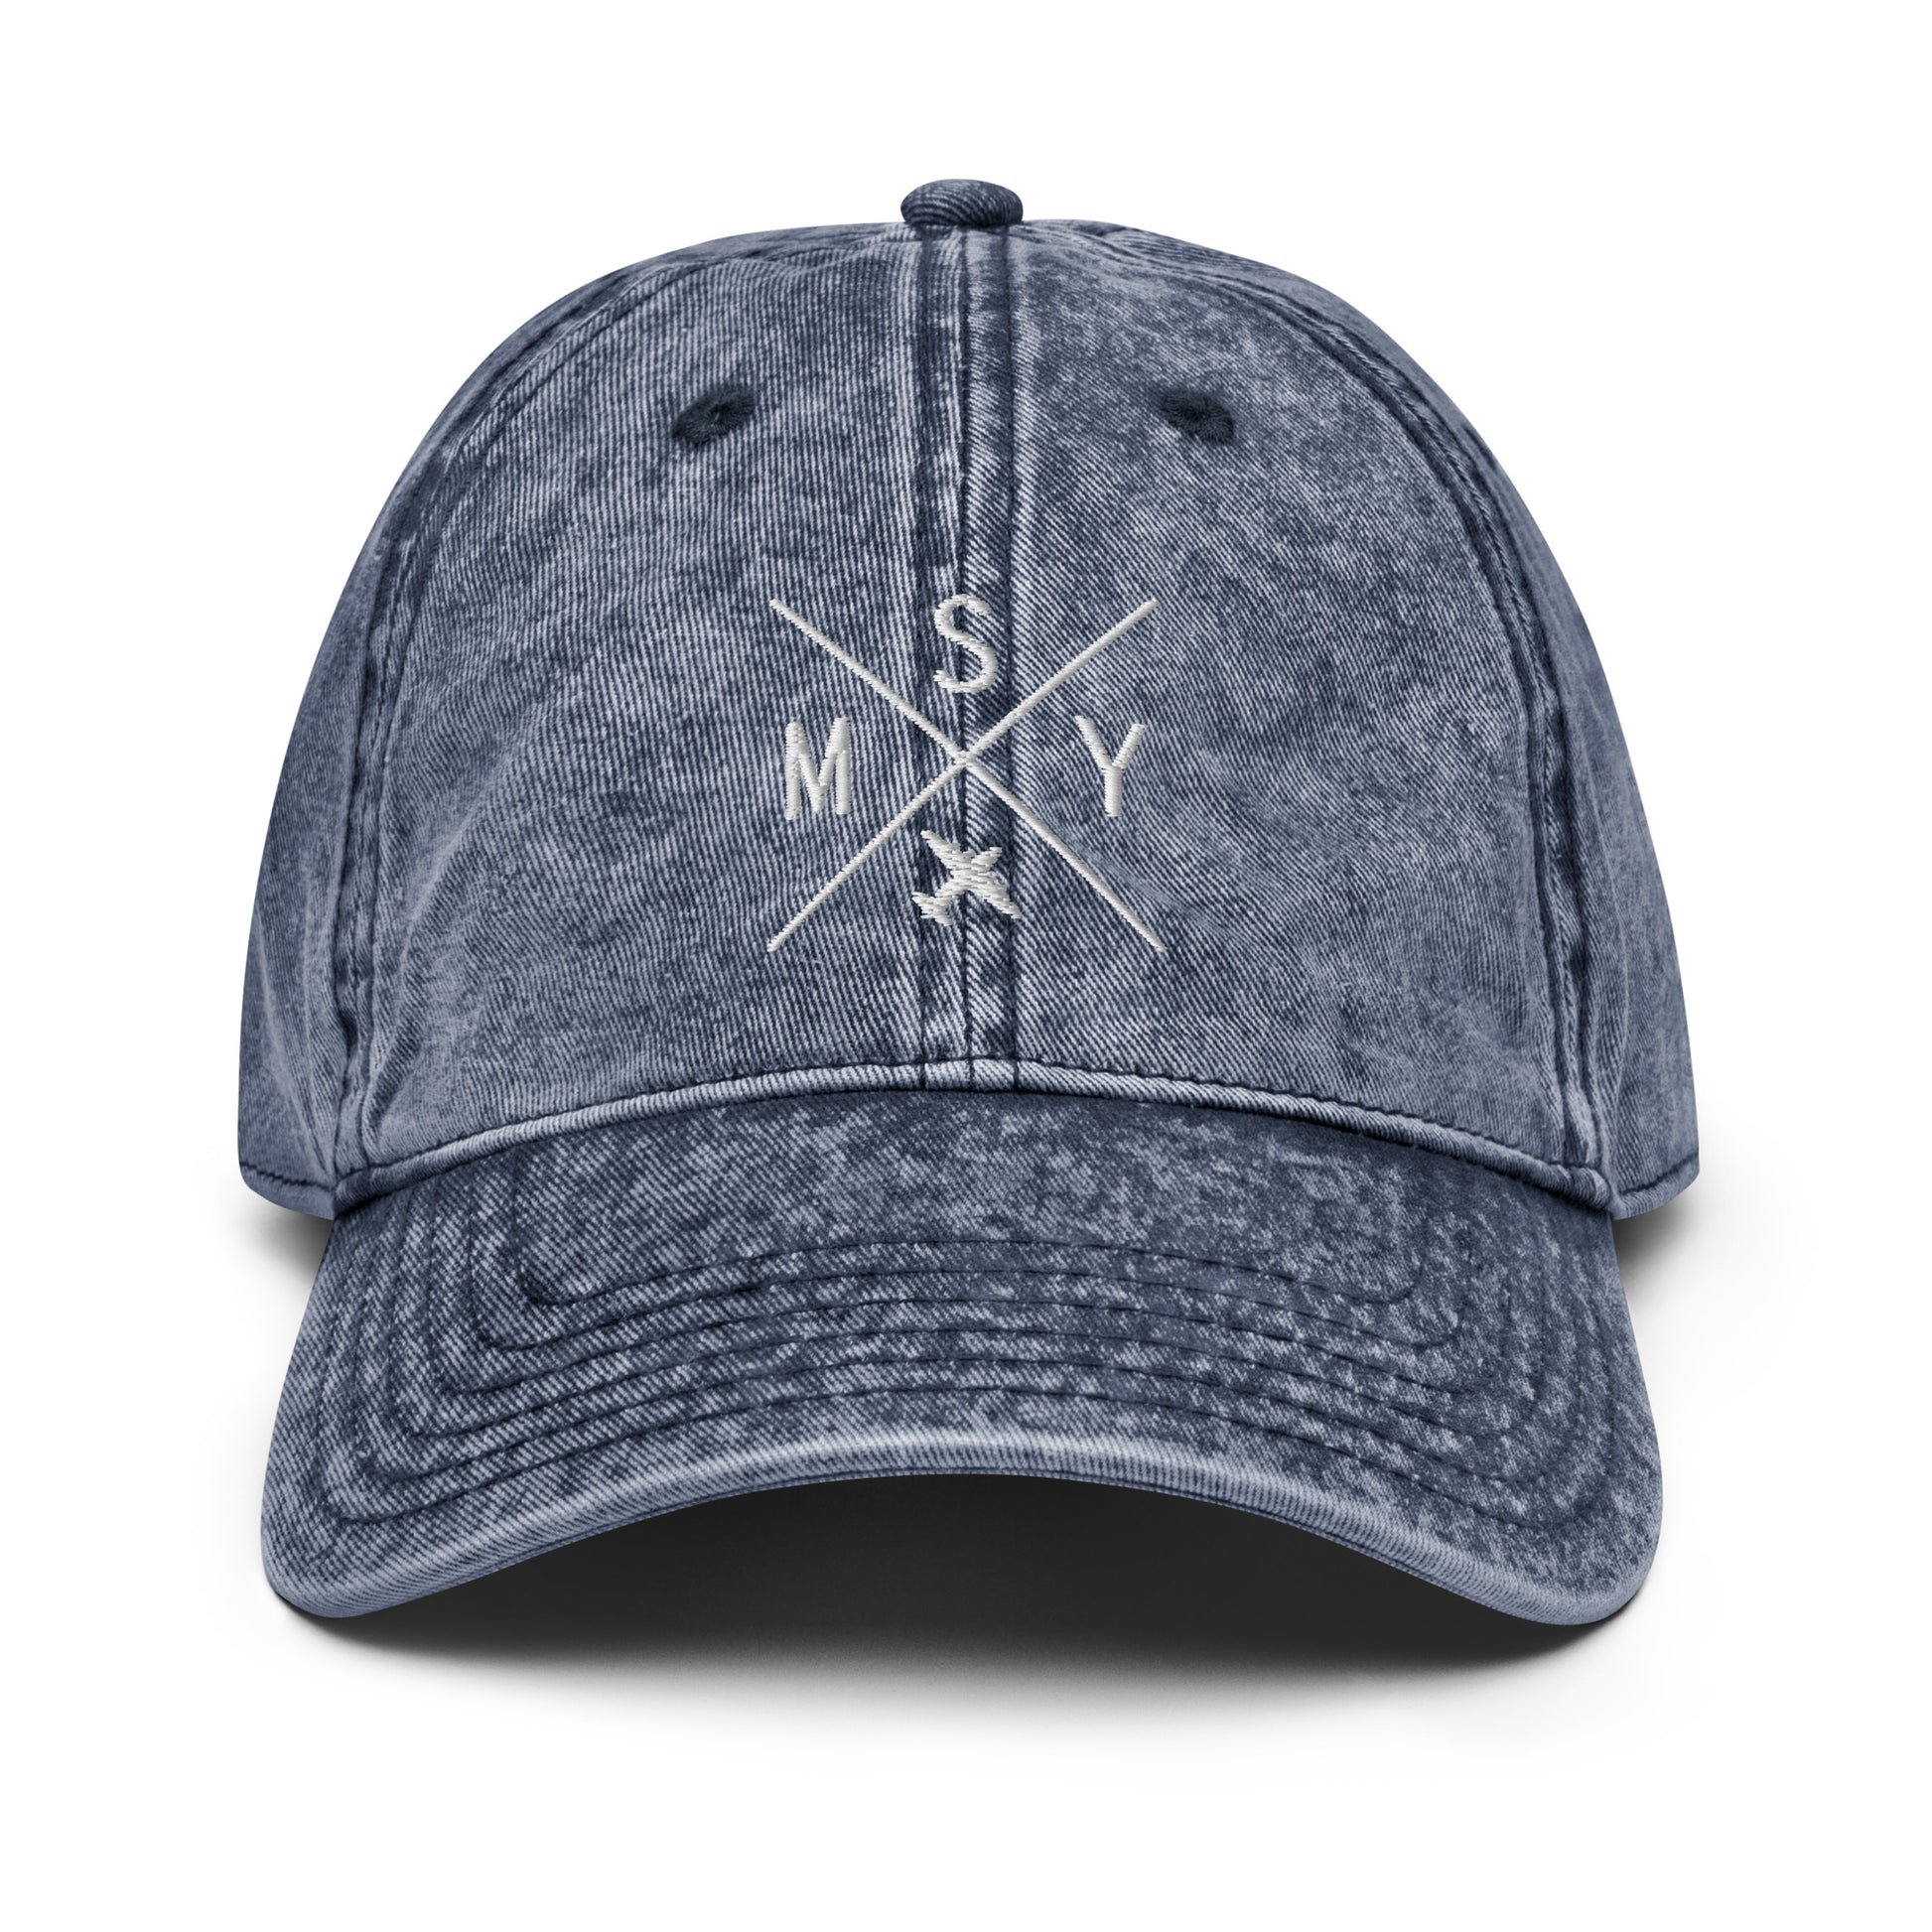 Crossed-X Cotton Twill Cap - White • MSY New Orleans • YHM Designs - Image 19